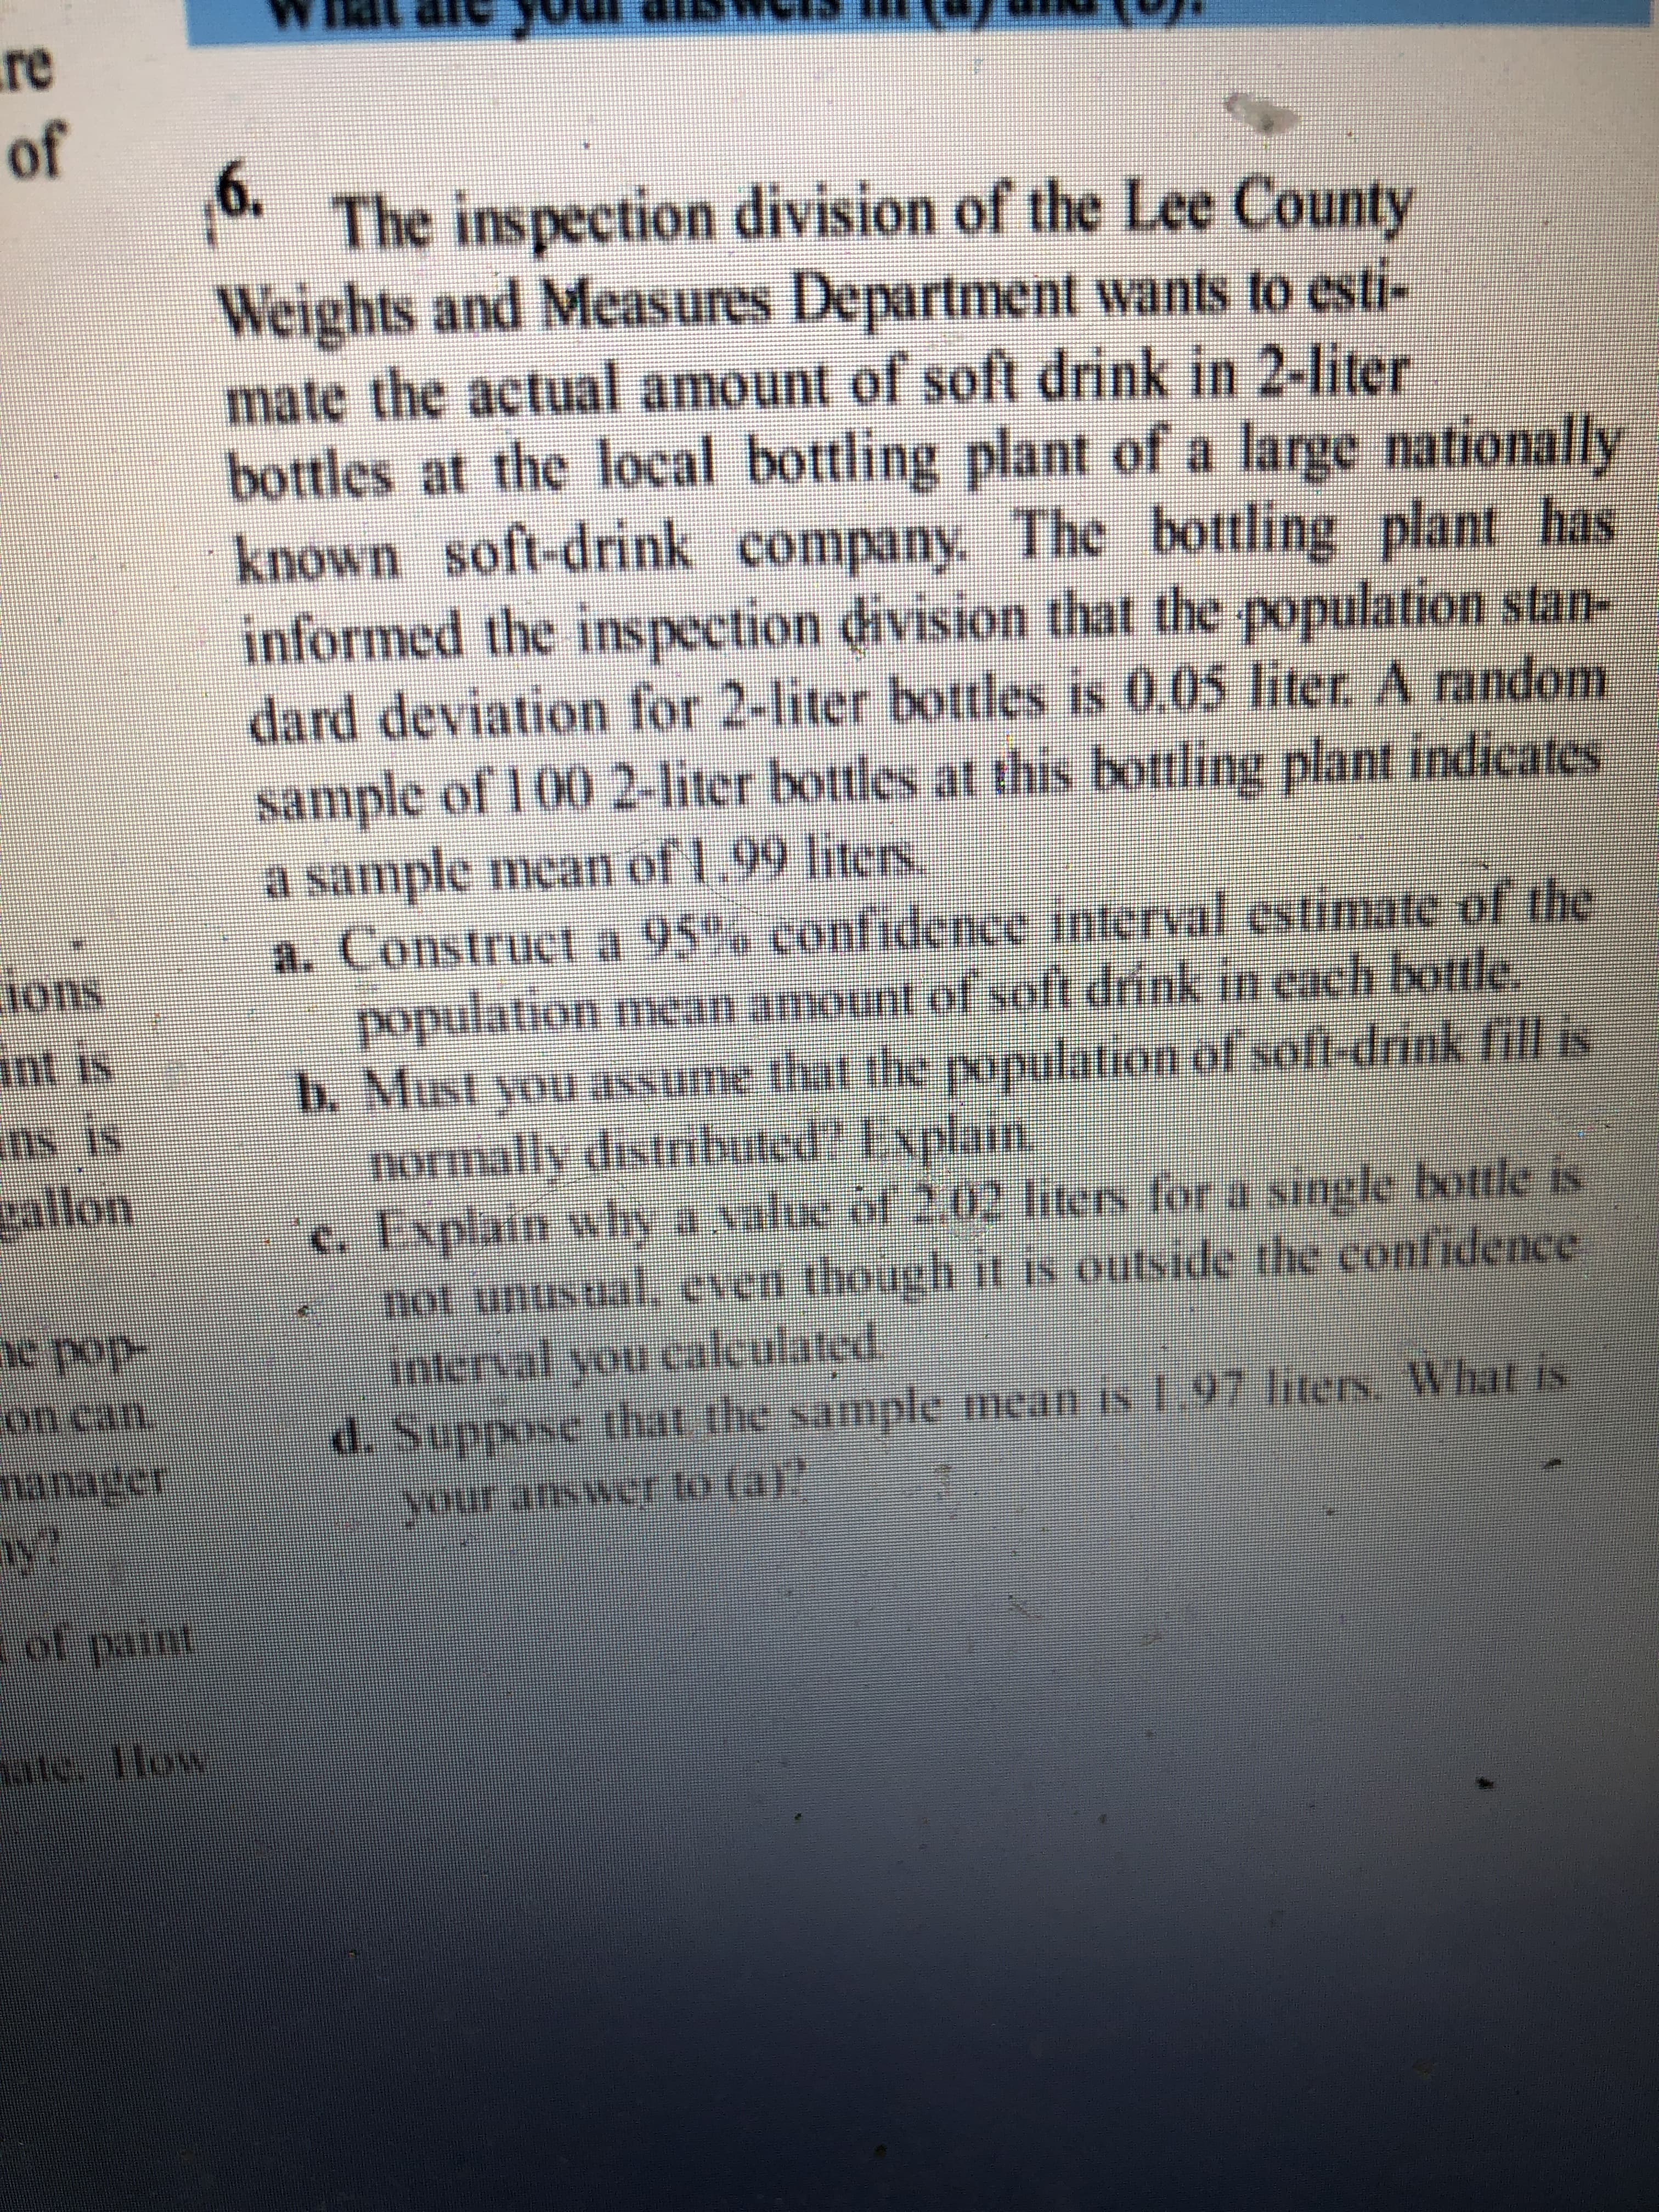 0. The inspection division of the Lee County
Weights and Measures Department wants to esti-
mate the actual amount of soft drink in 2-liter
